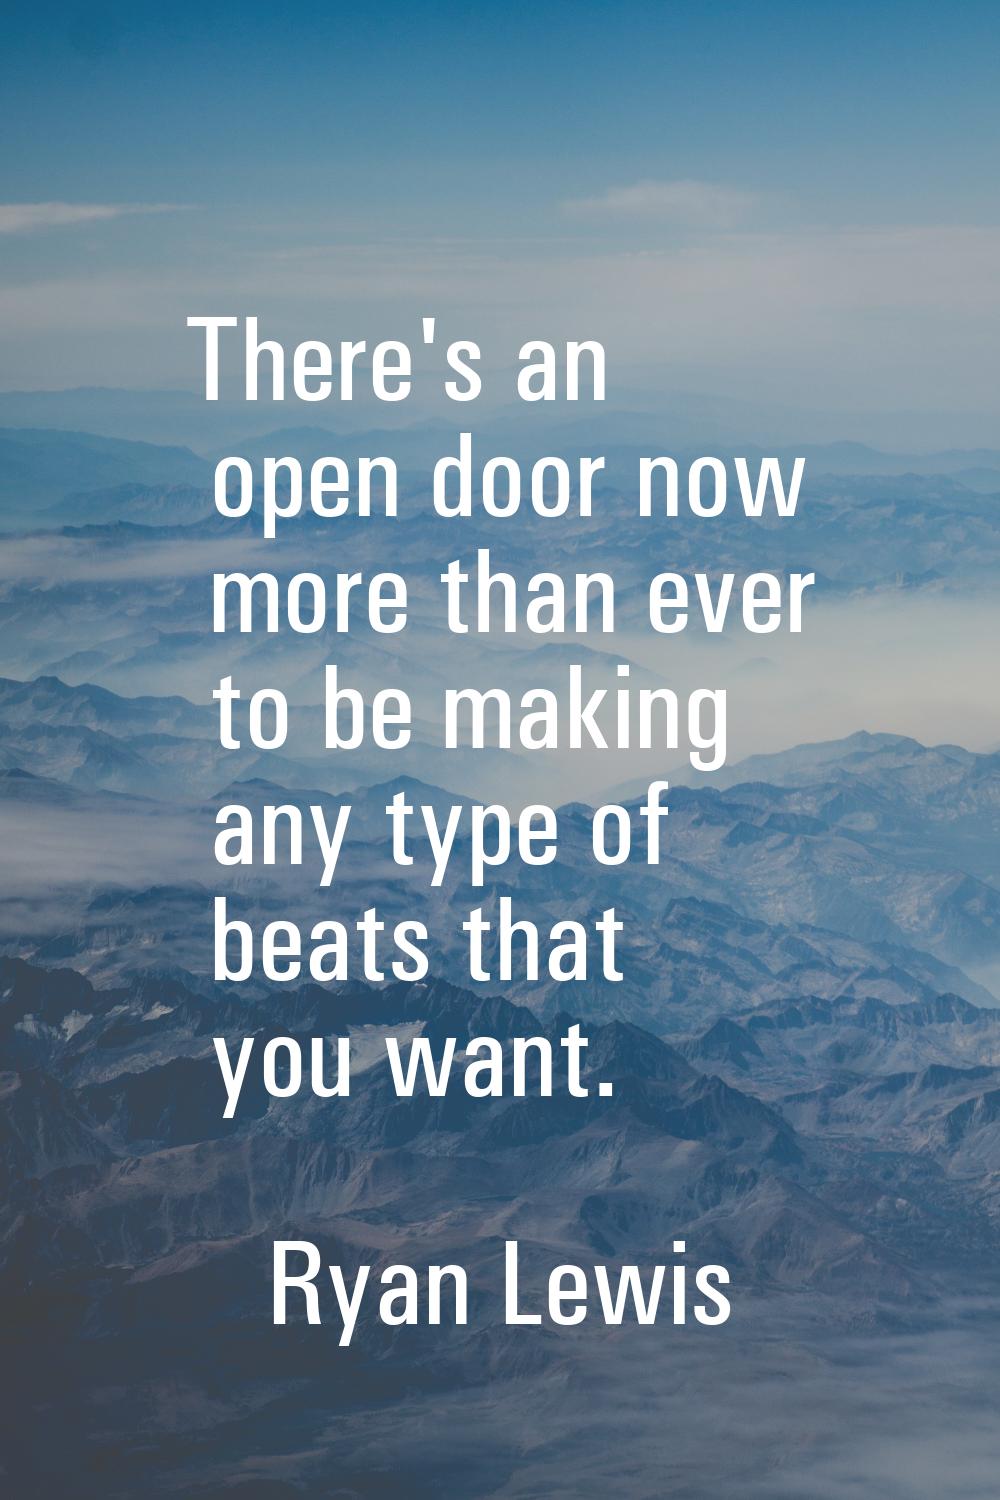 There's an open door now more than ever to be making any type of beats that you want.